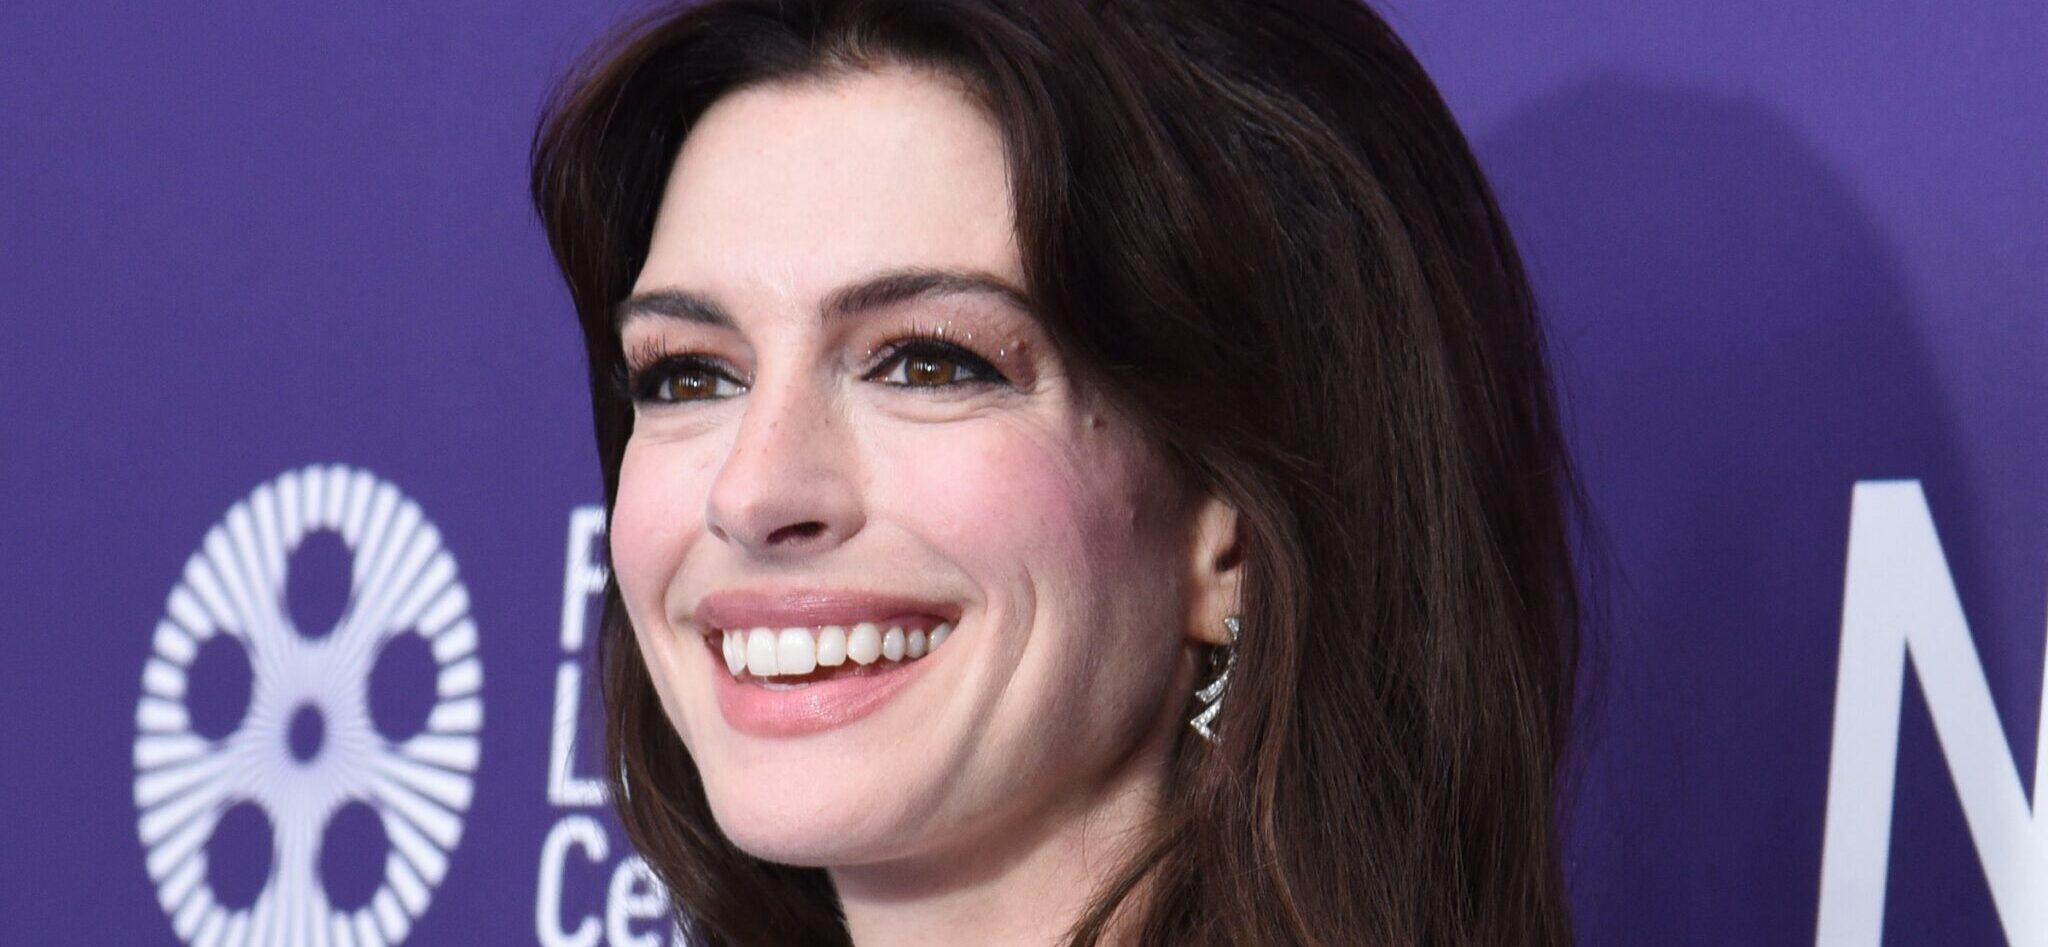 Anne Hathaway's 'Condescending' Fan Interaction Sparks Debate [VIDEO]